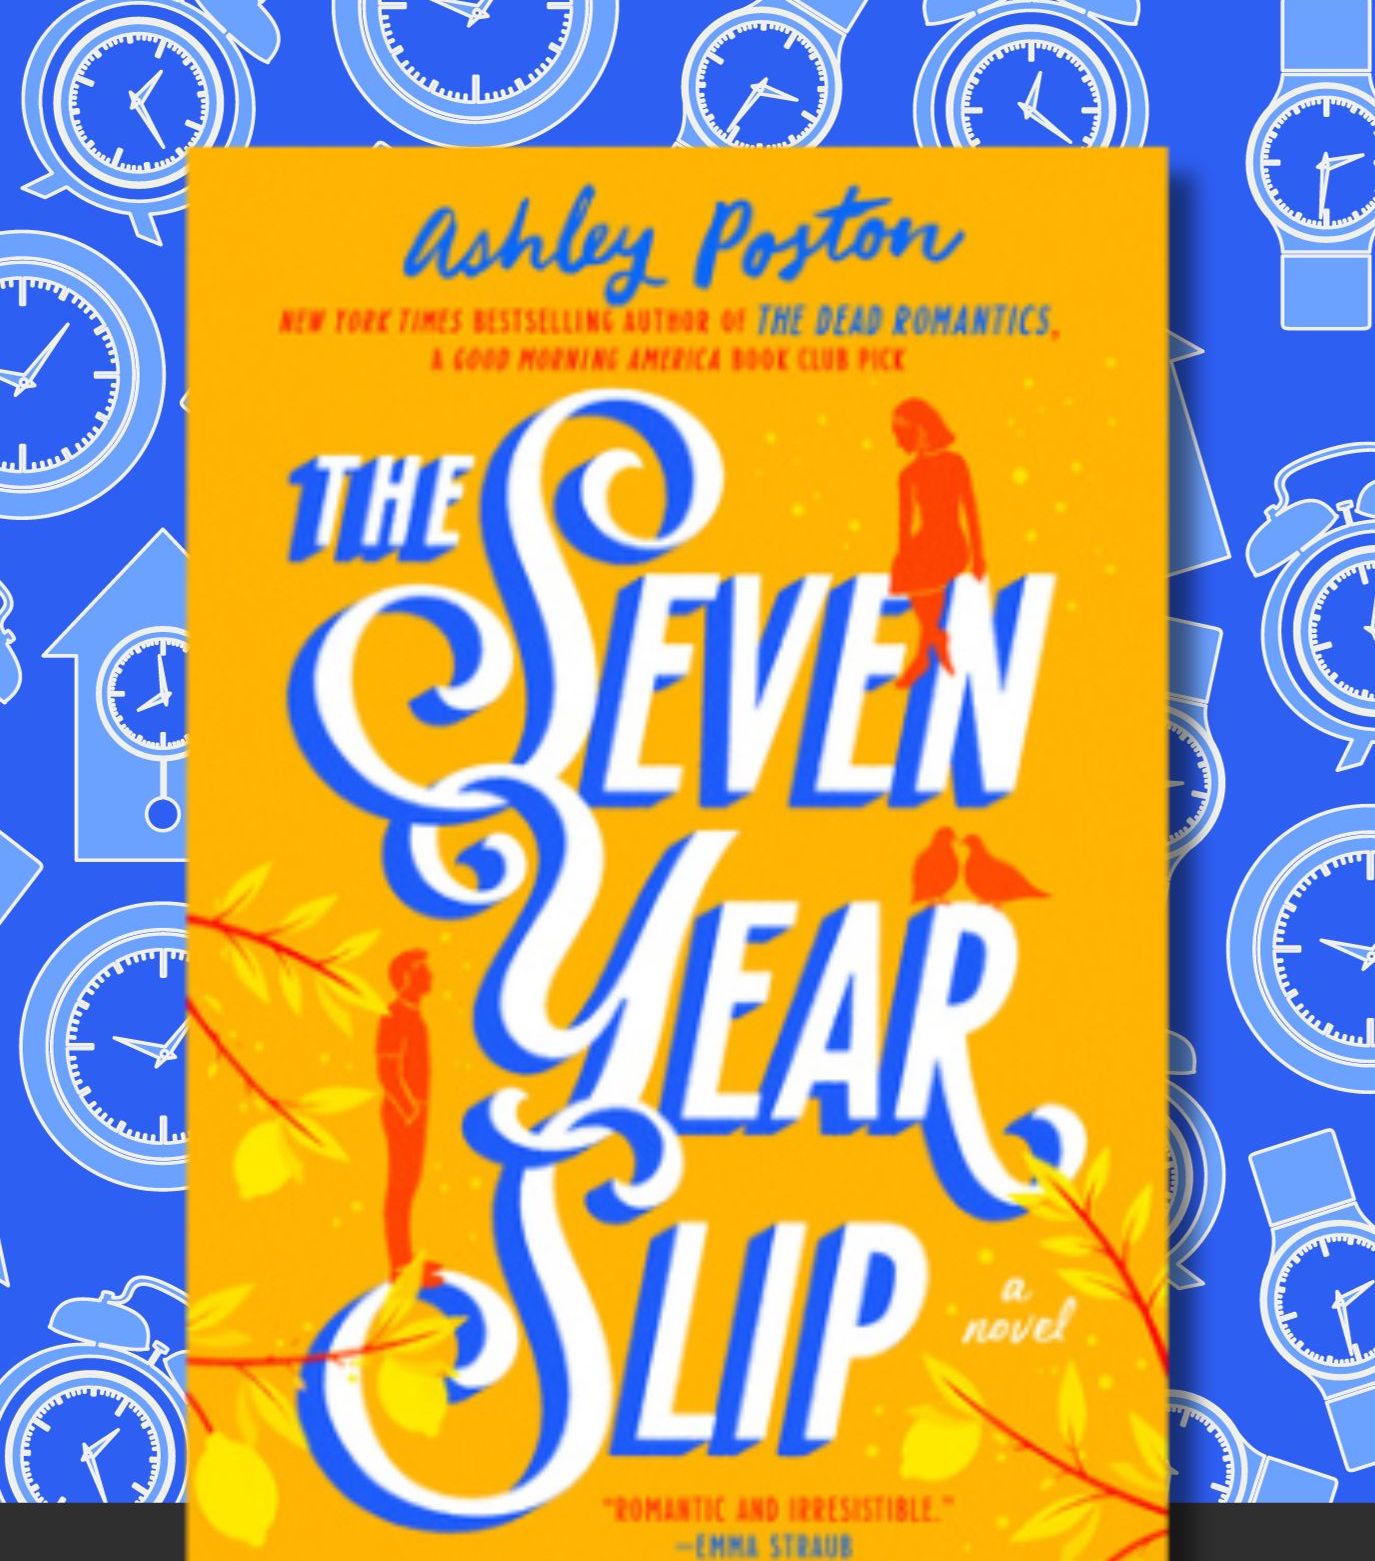 Ashley Poston's The Seven Year Slip, Book Review: Wisely charming